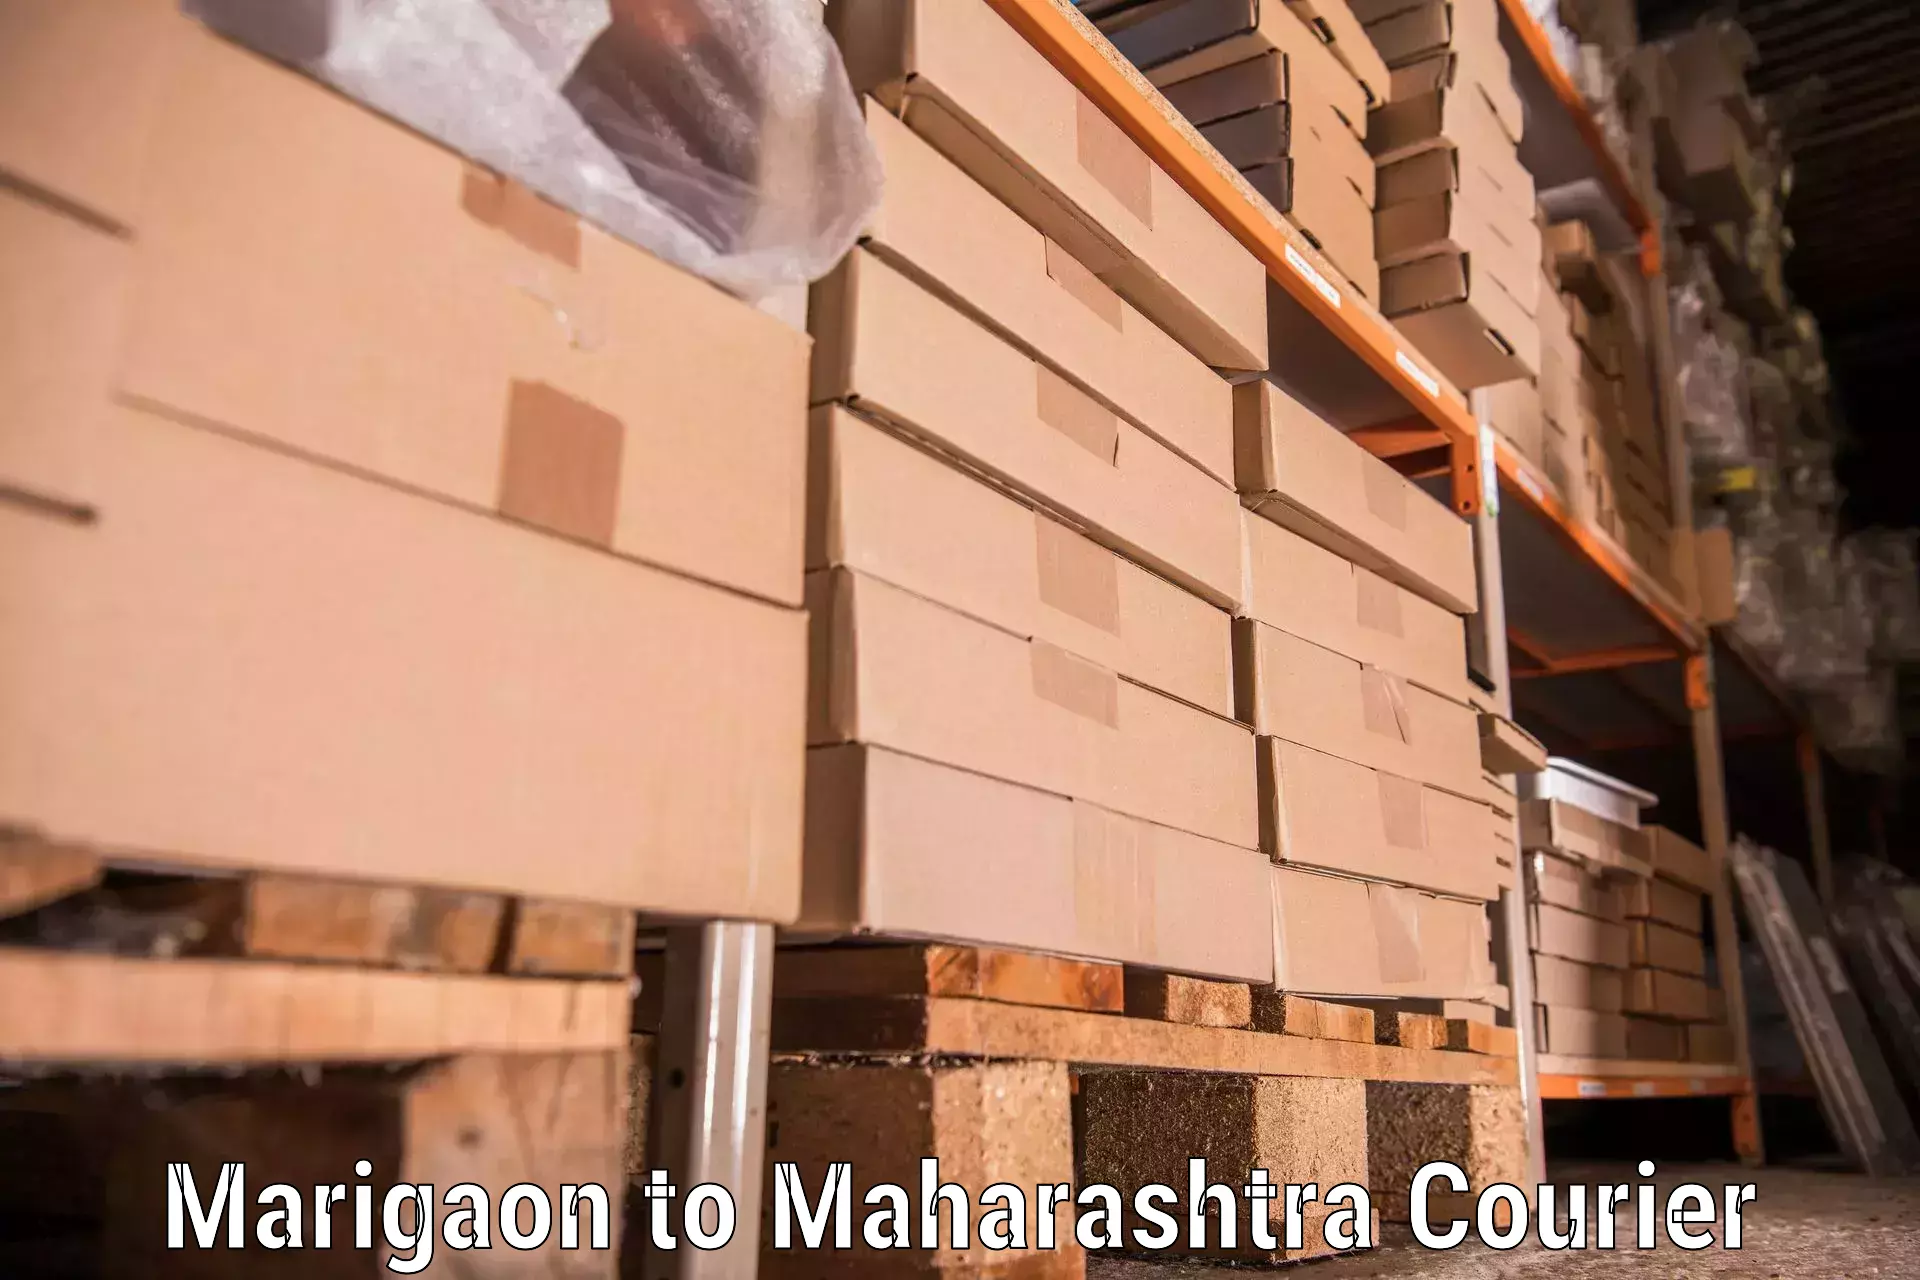 Reliable moving assistance in Marigaon to Shirdi